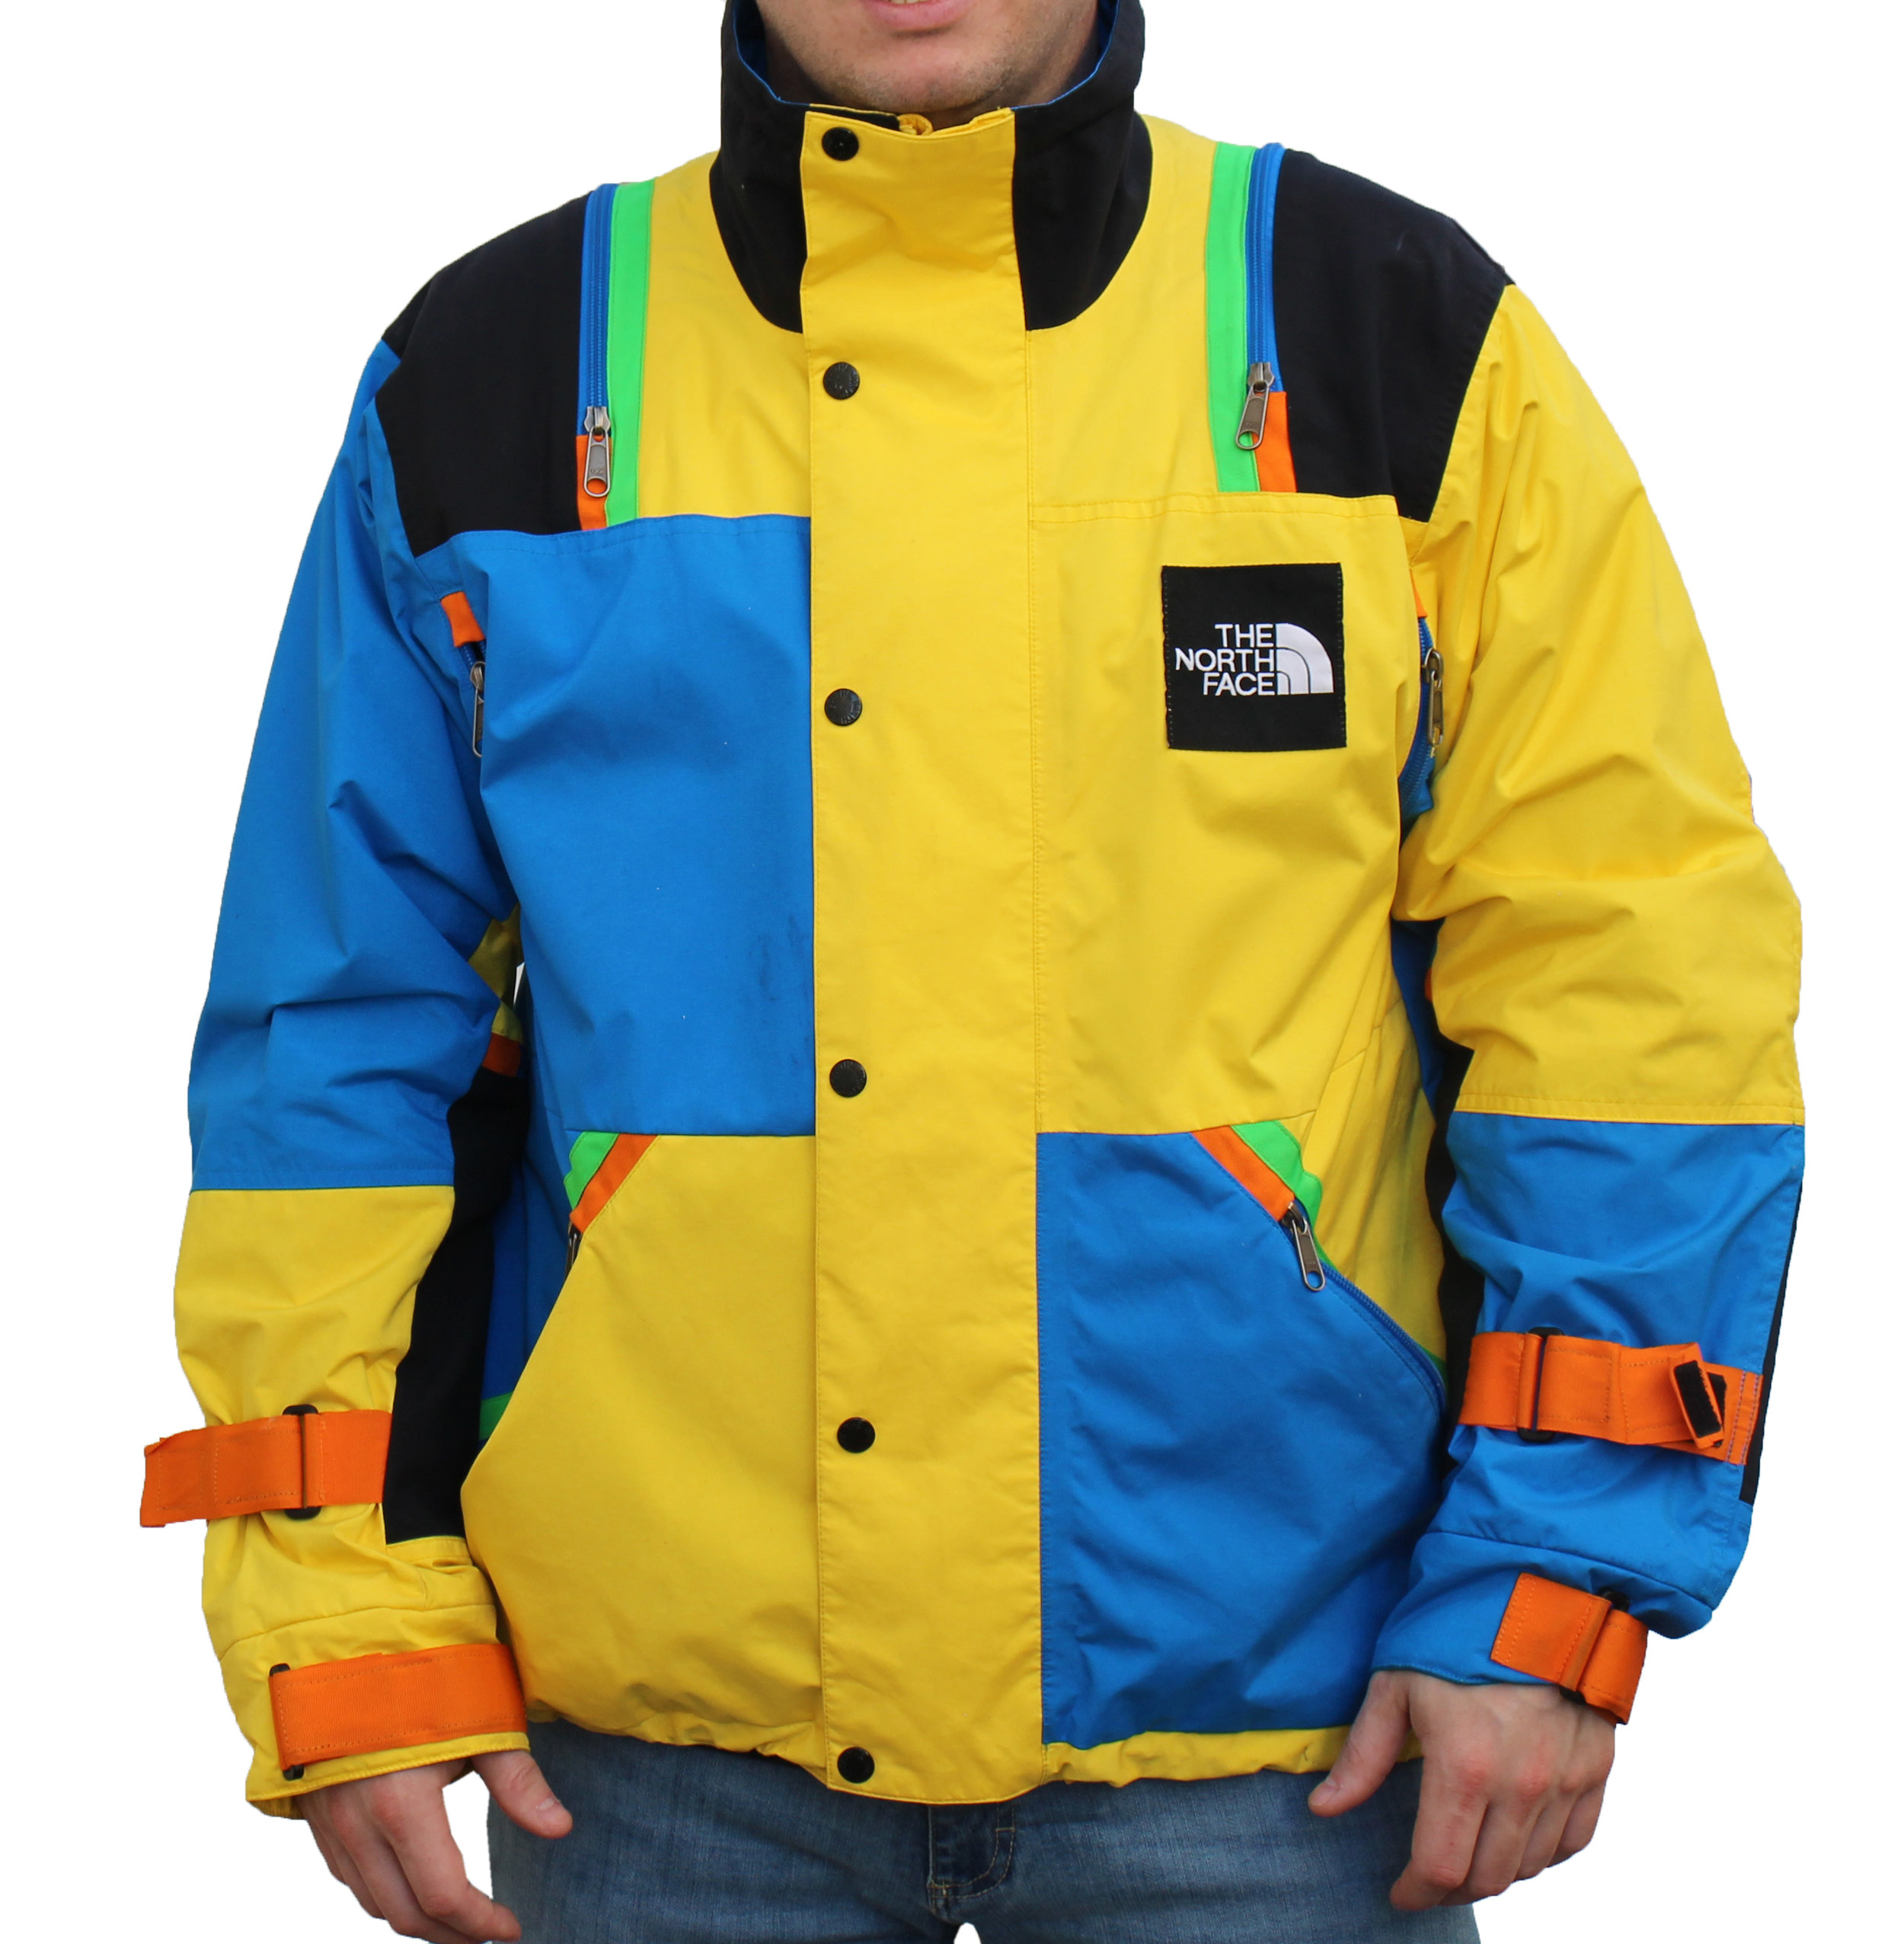 The North Face Colorful Jacket (Size L 